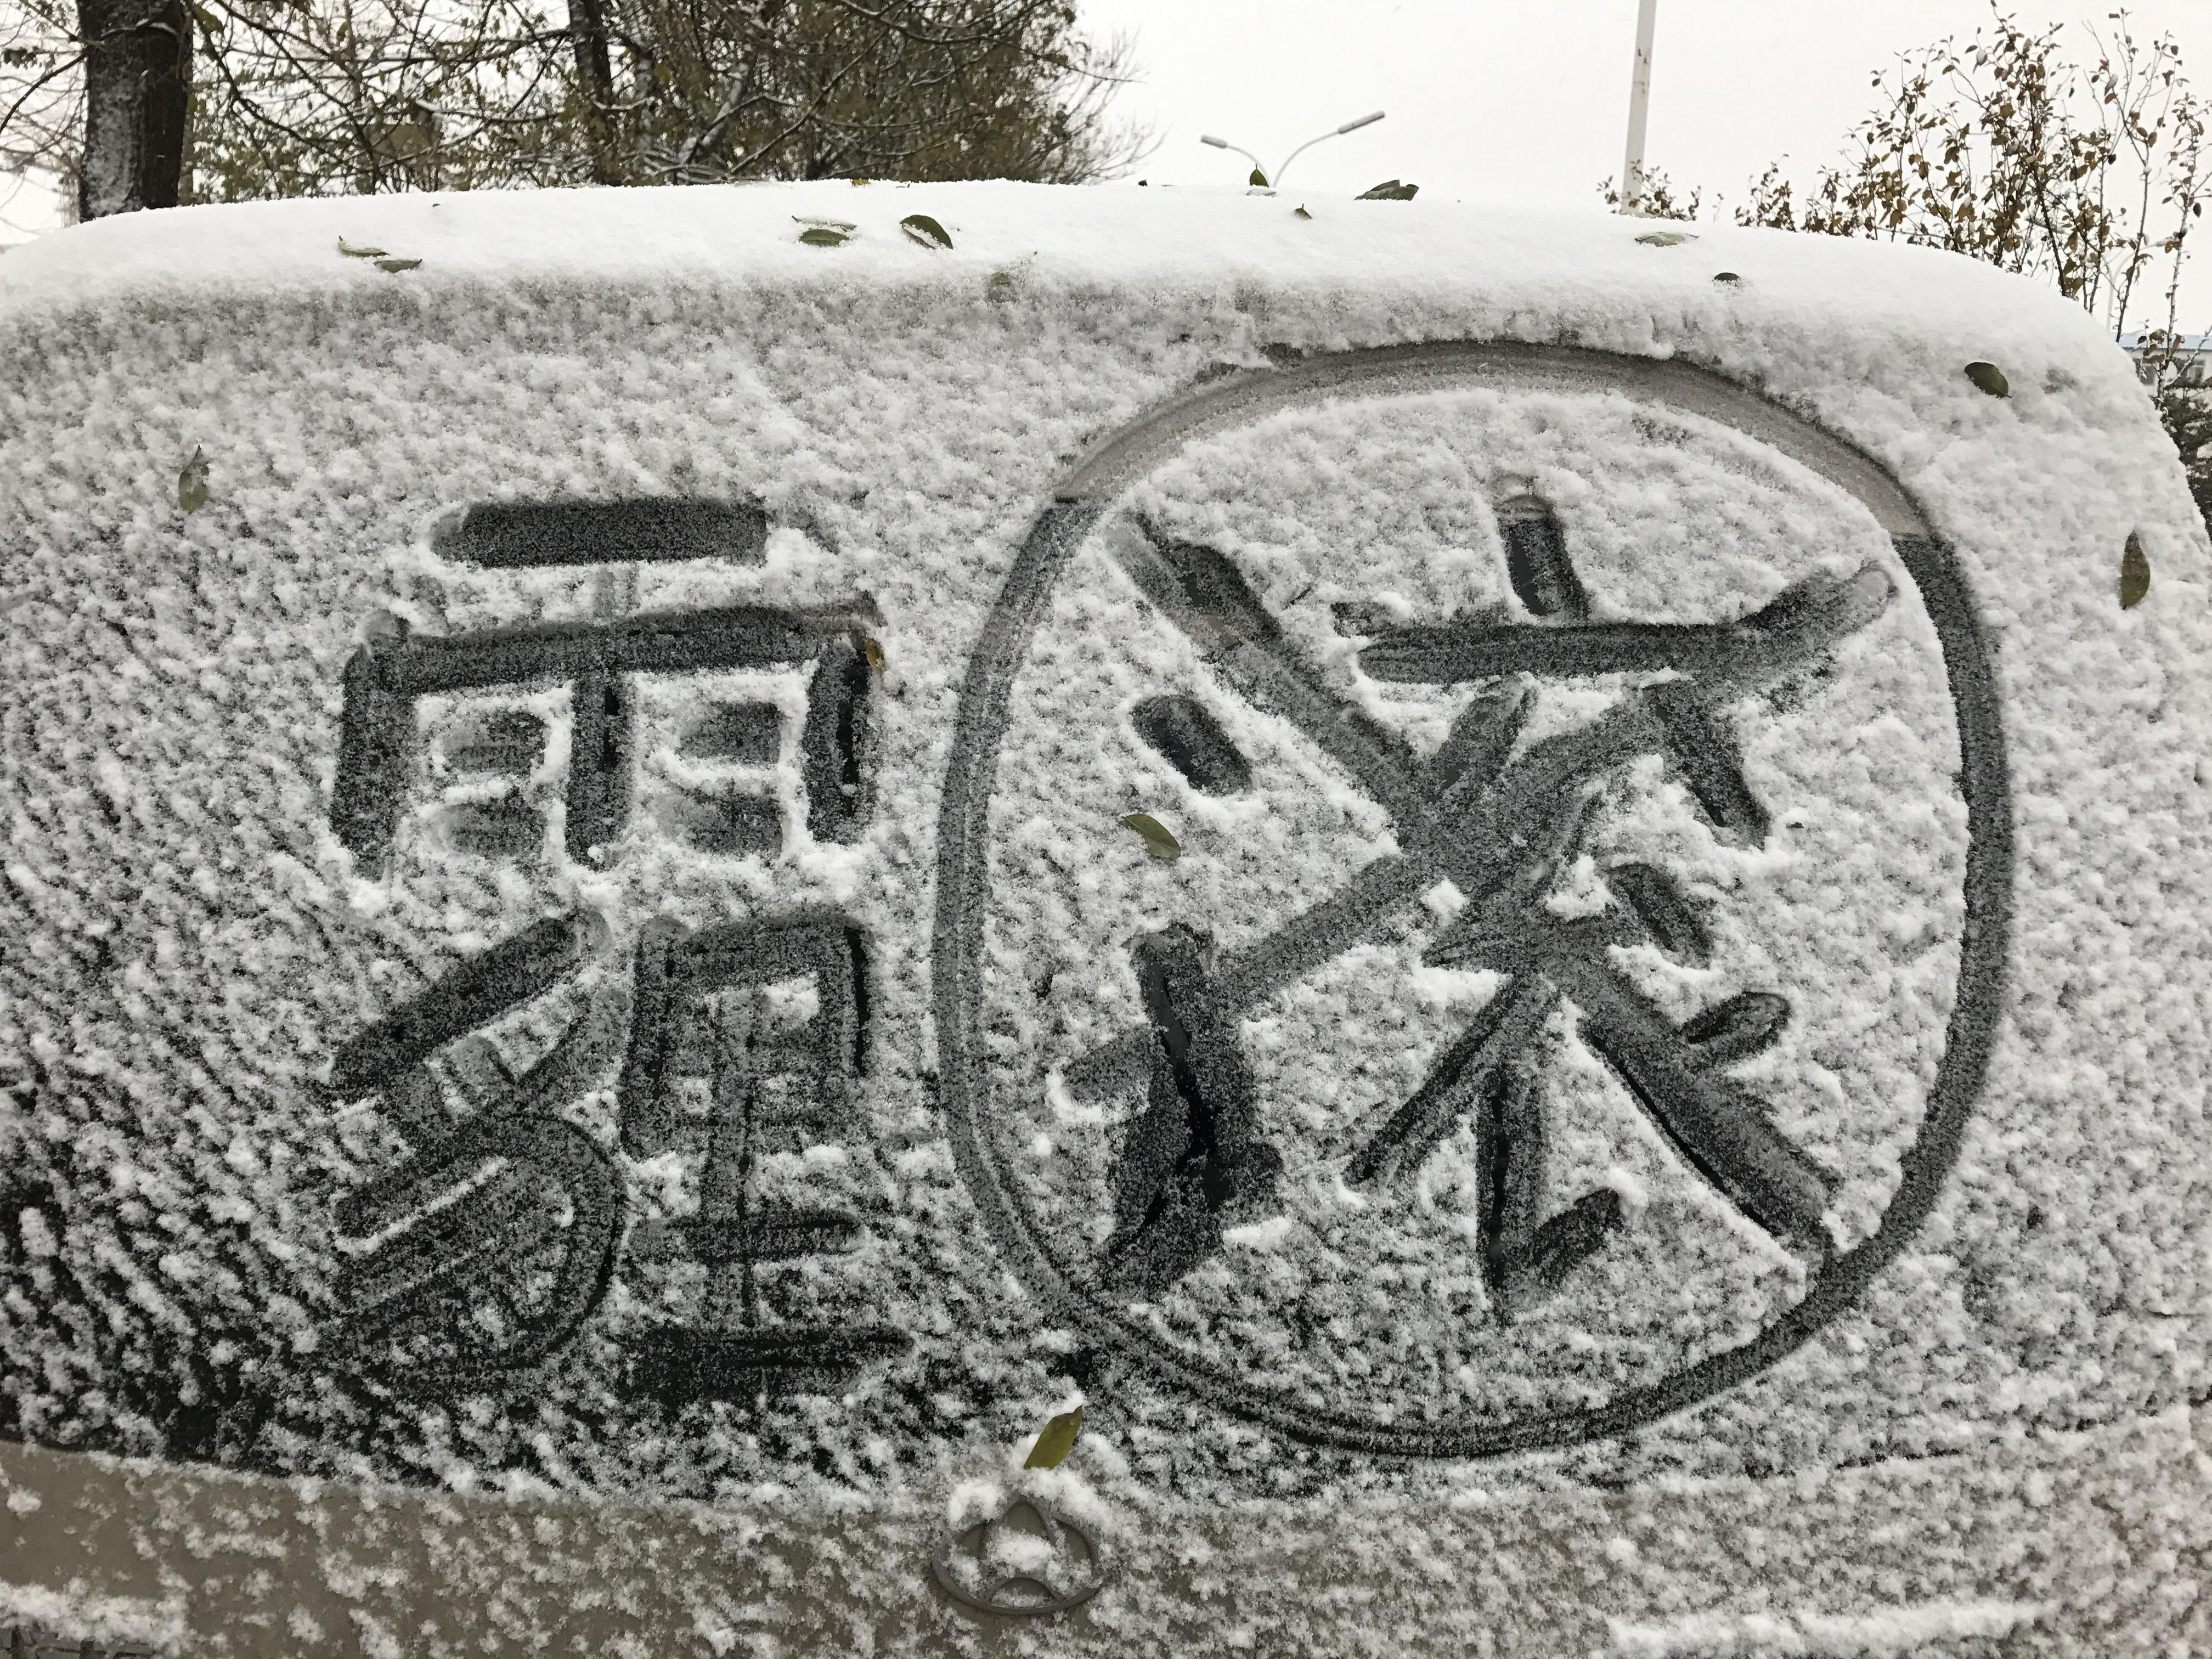 A vehicle is covered with snow with Chinese words that say "Get Out! Smog" on Nov. 21, 2016, in Beijing (VCG/Getty Images)